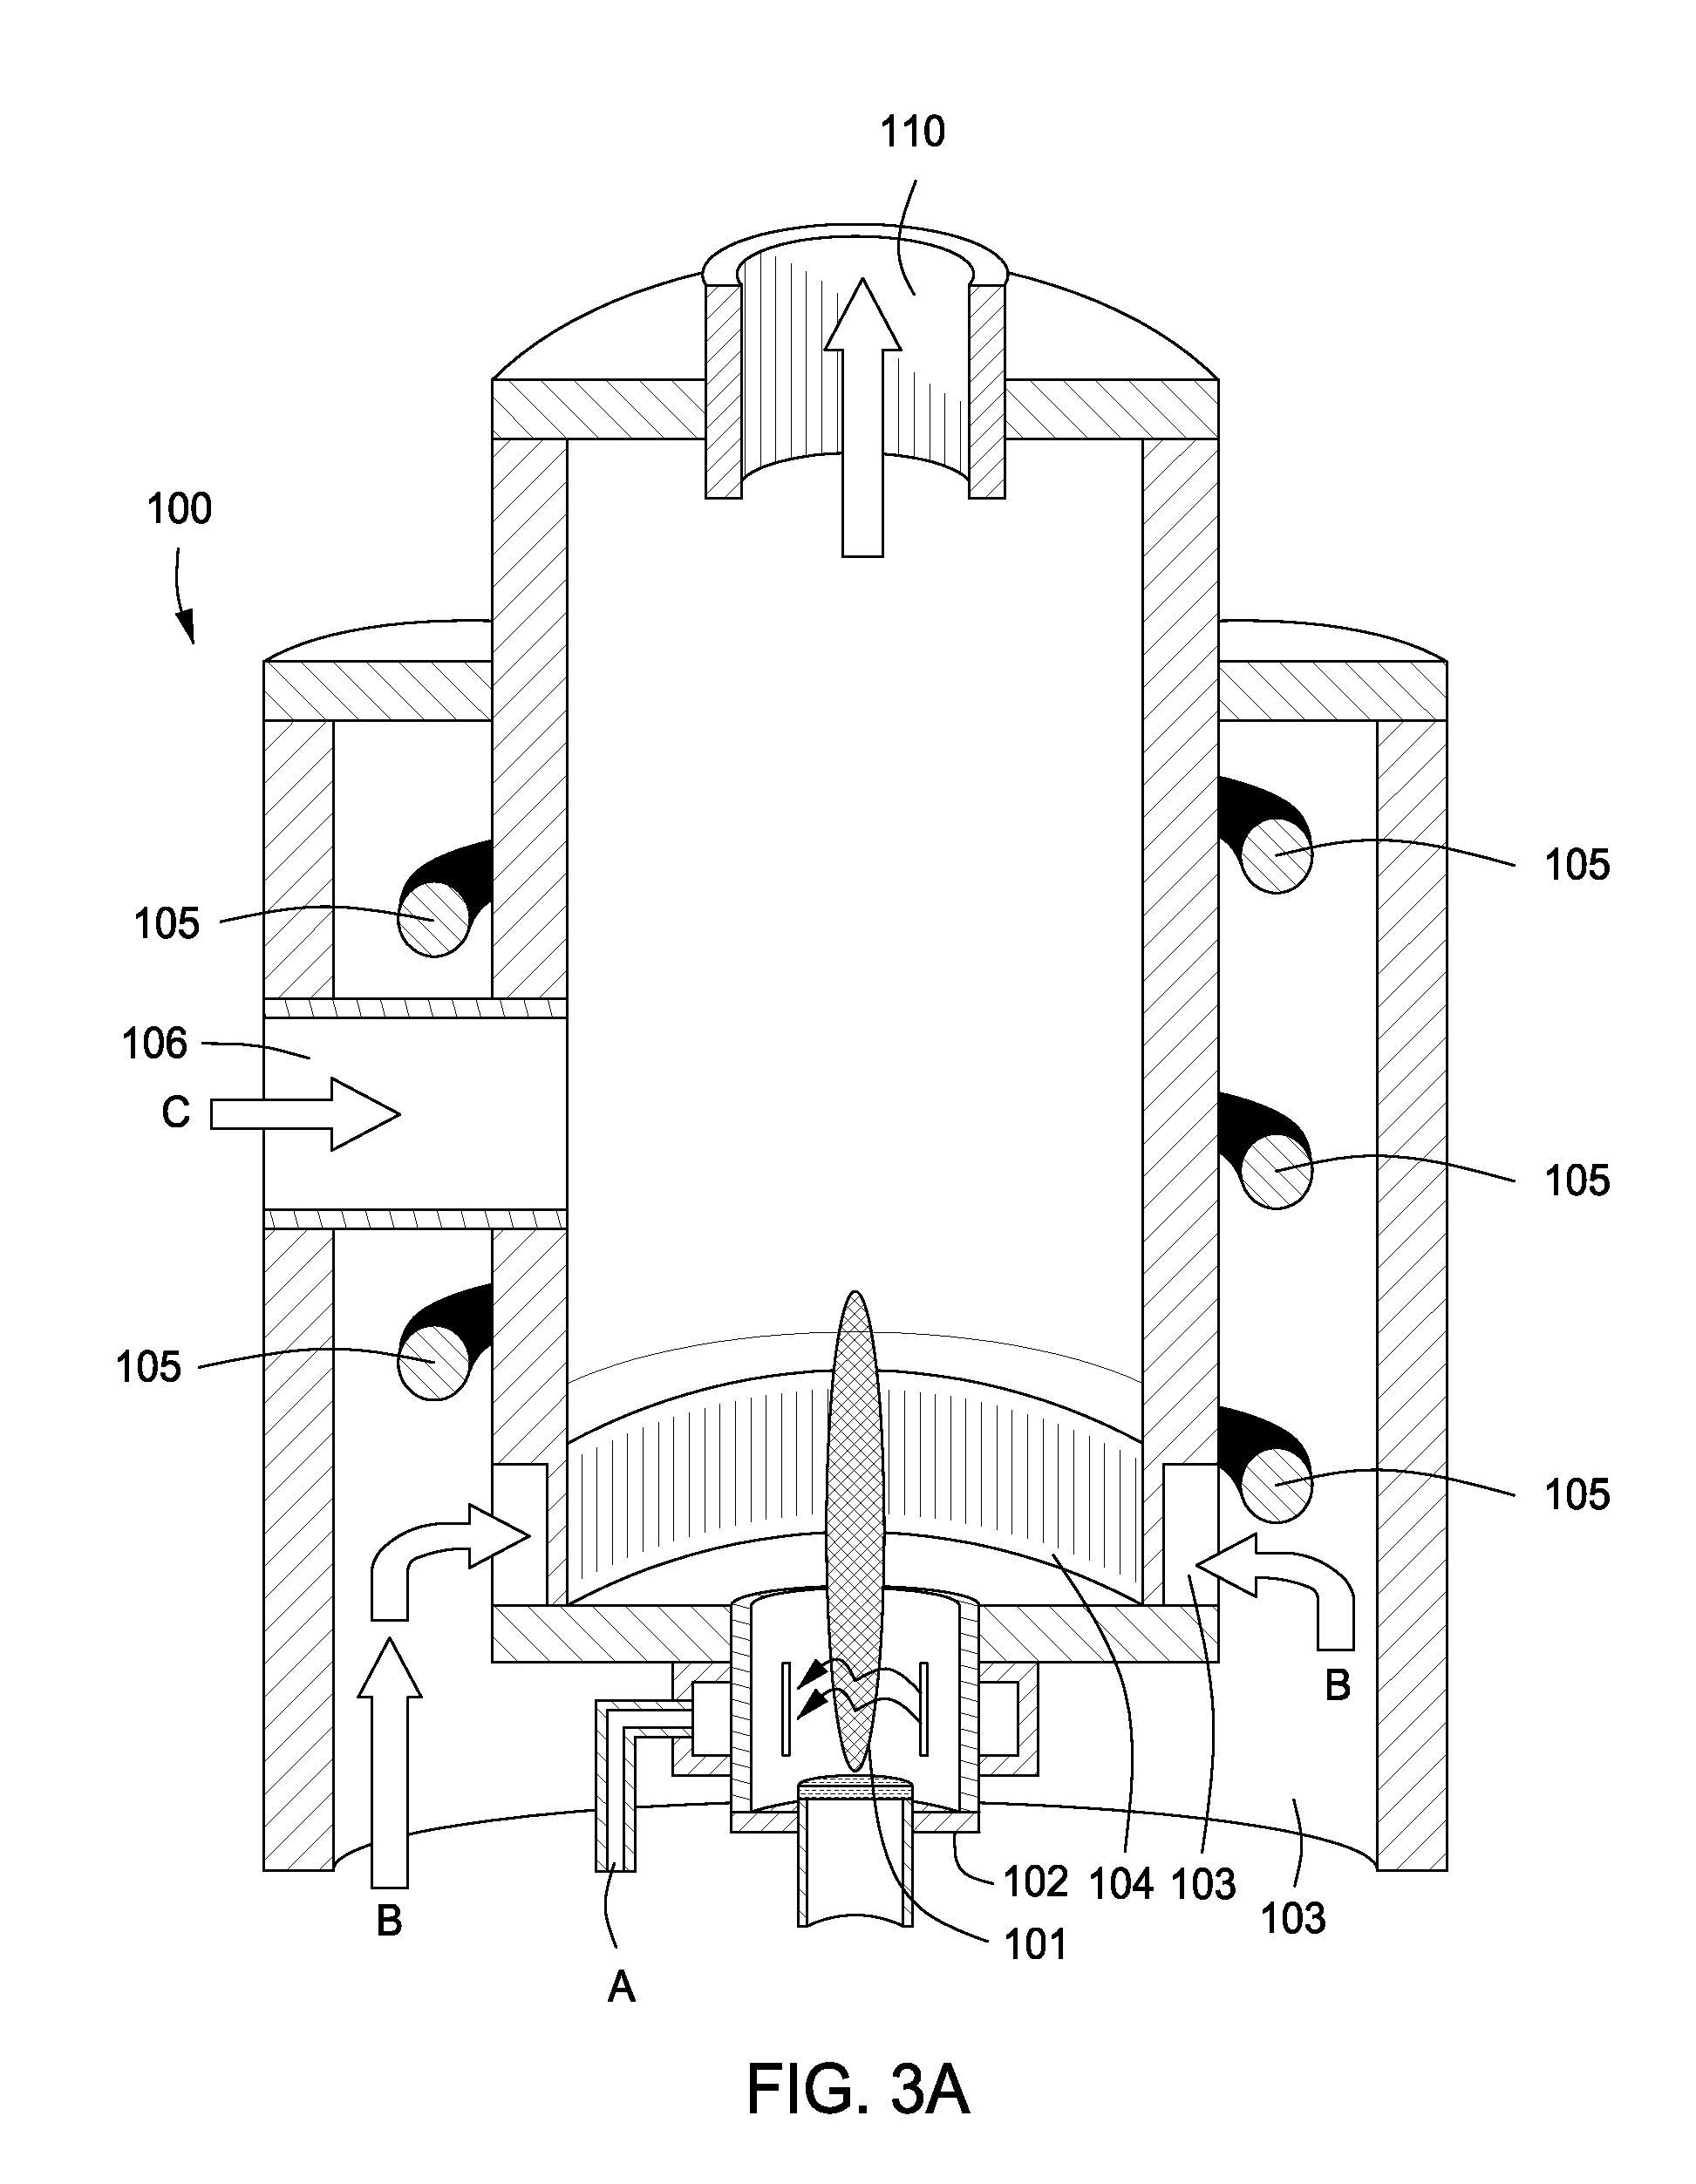 Apparatus for Treating a Substance with Wave Energy from Plasma and an Electrical Arc